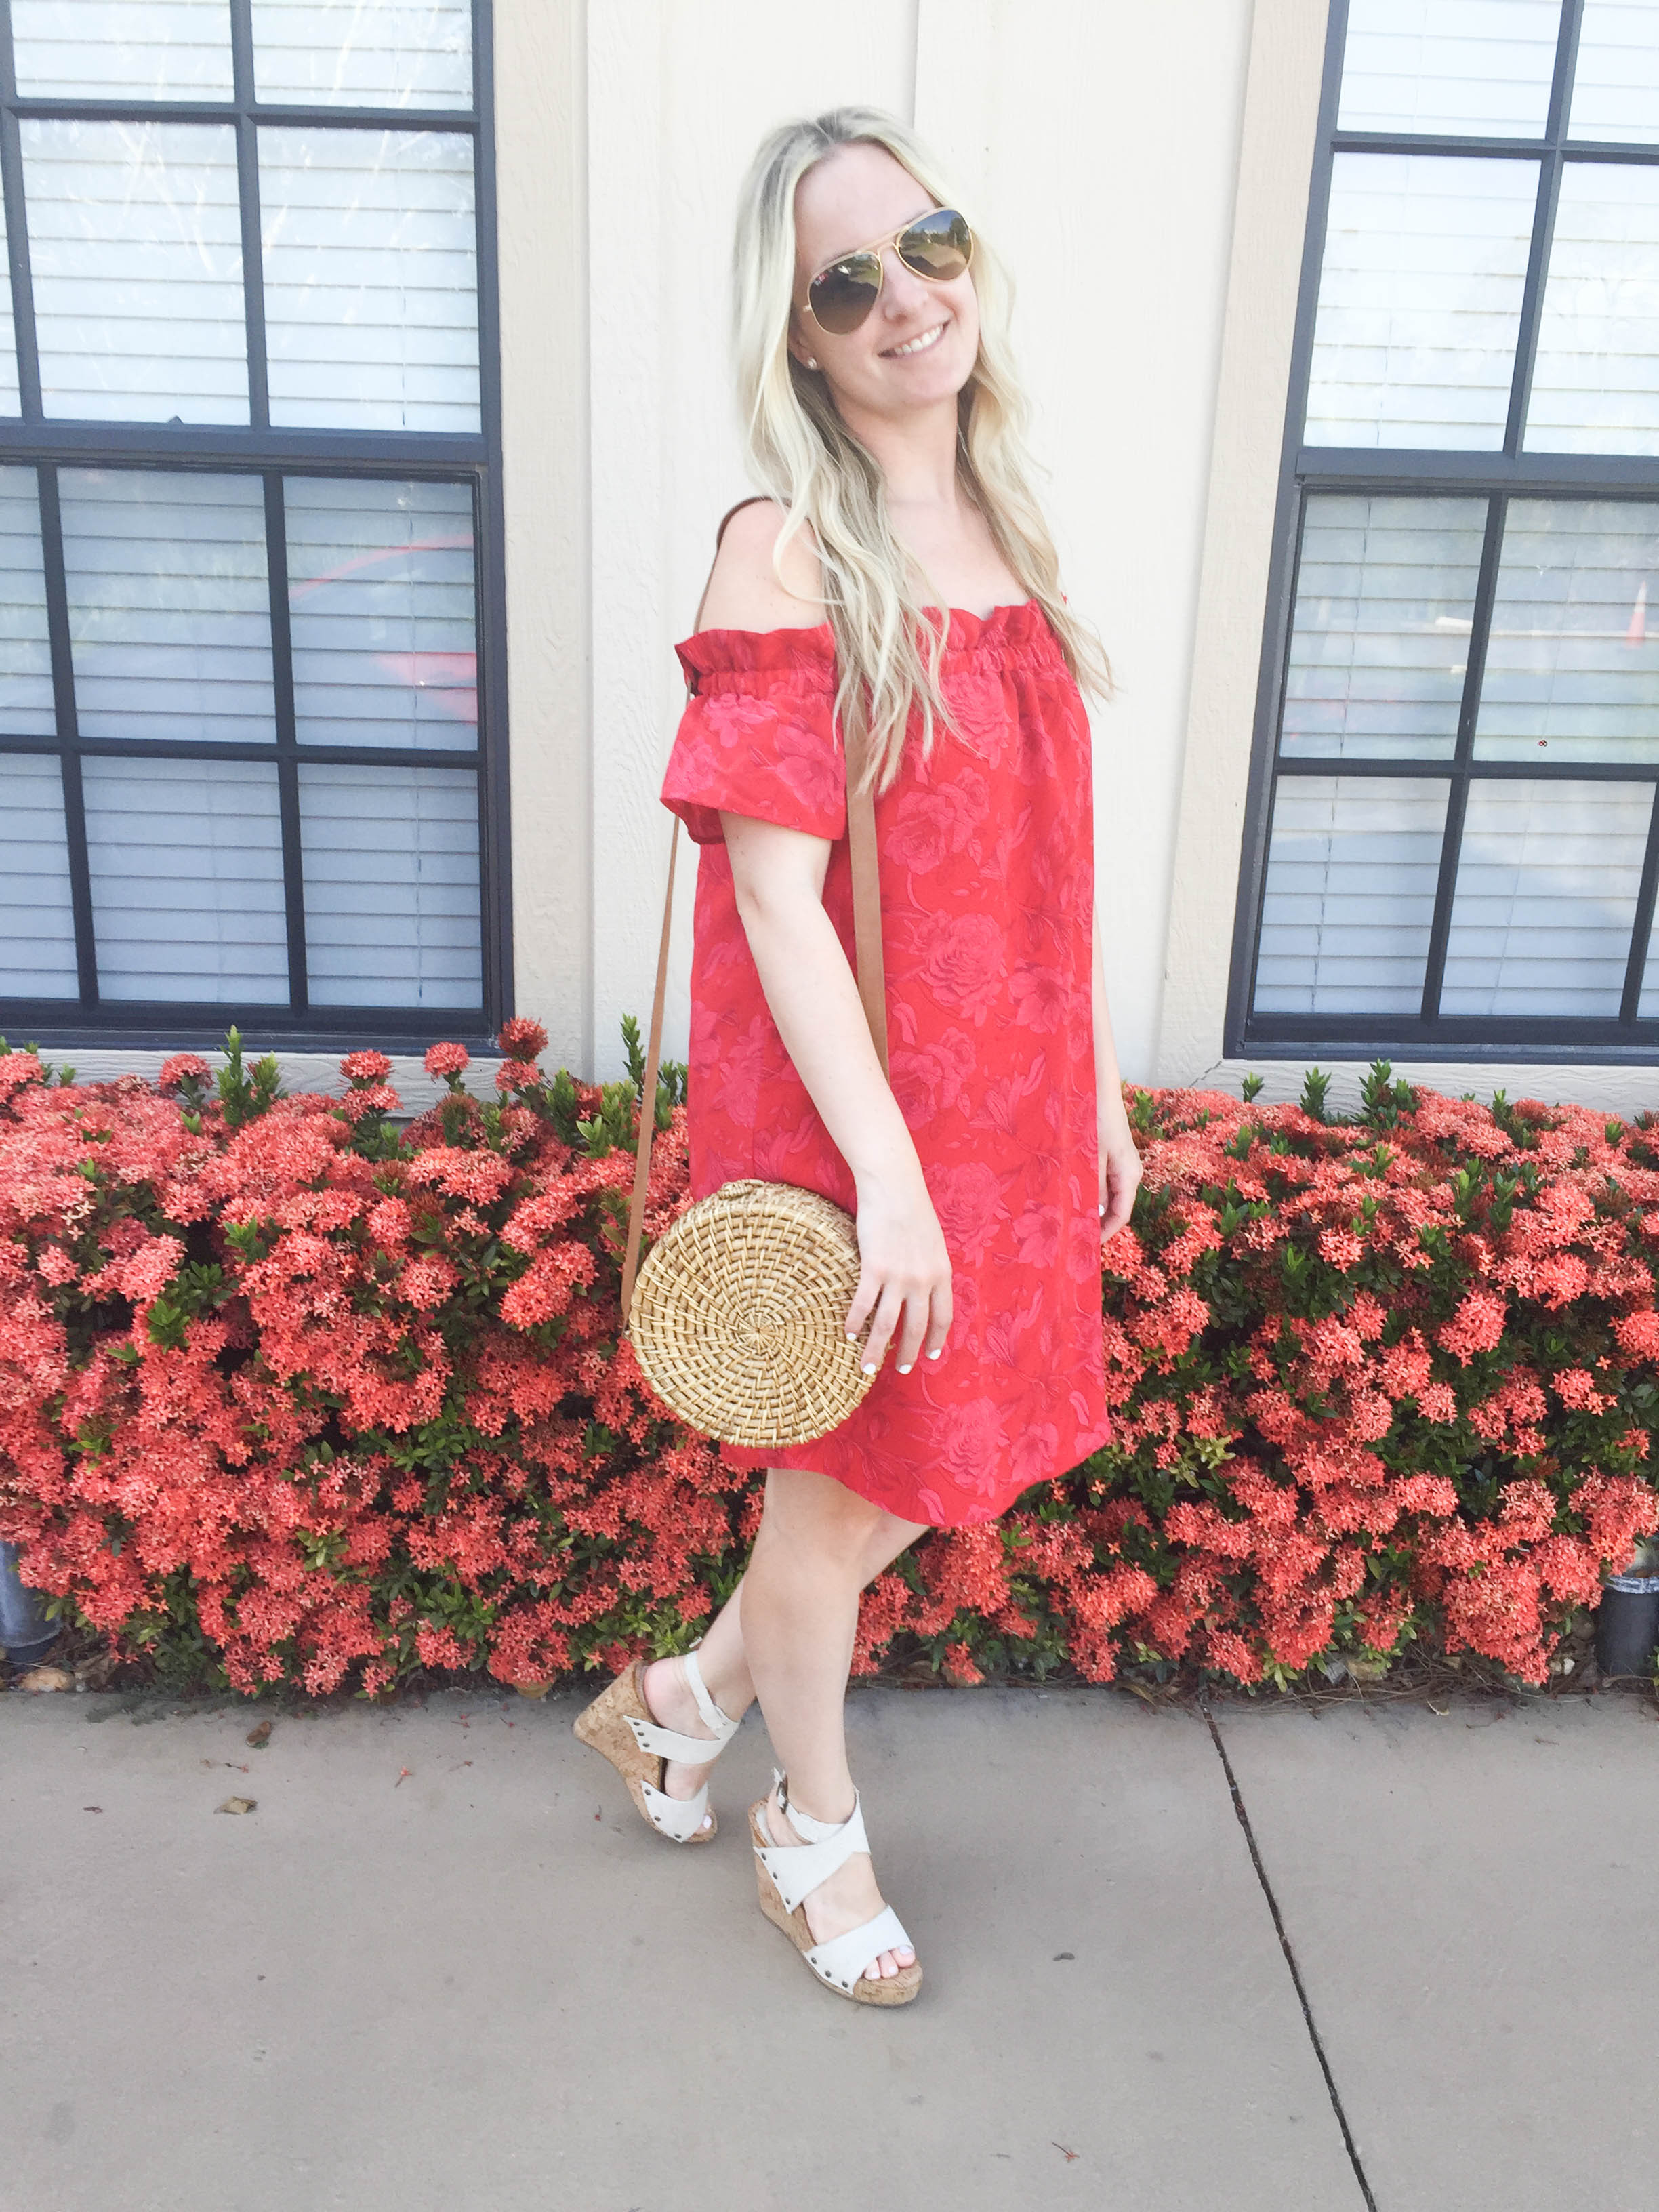 Off the shoulder Dress on livin' life with style 